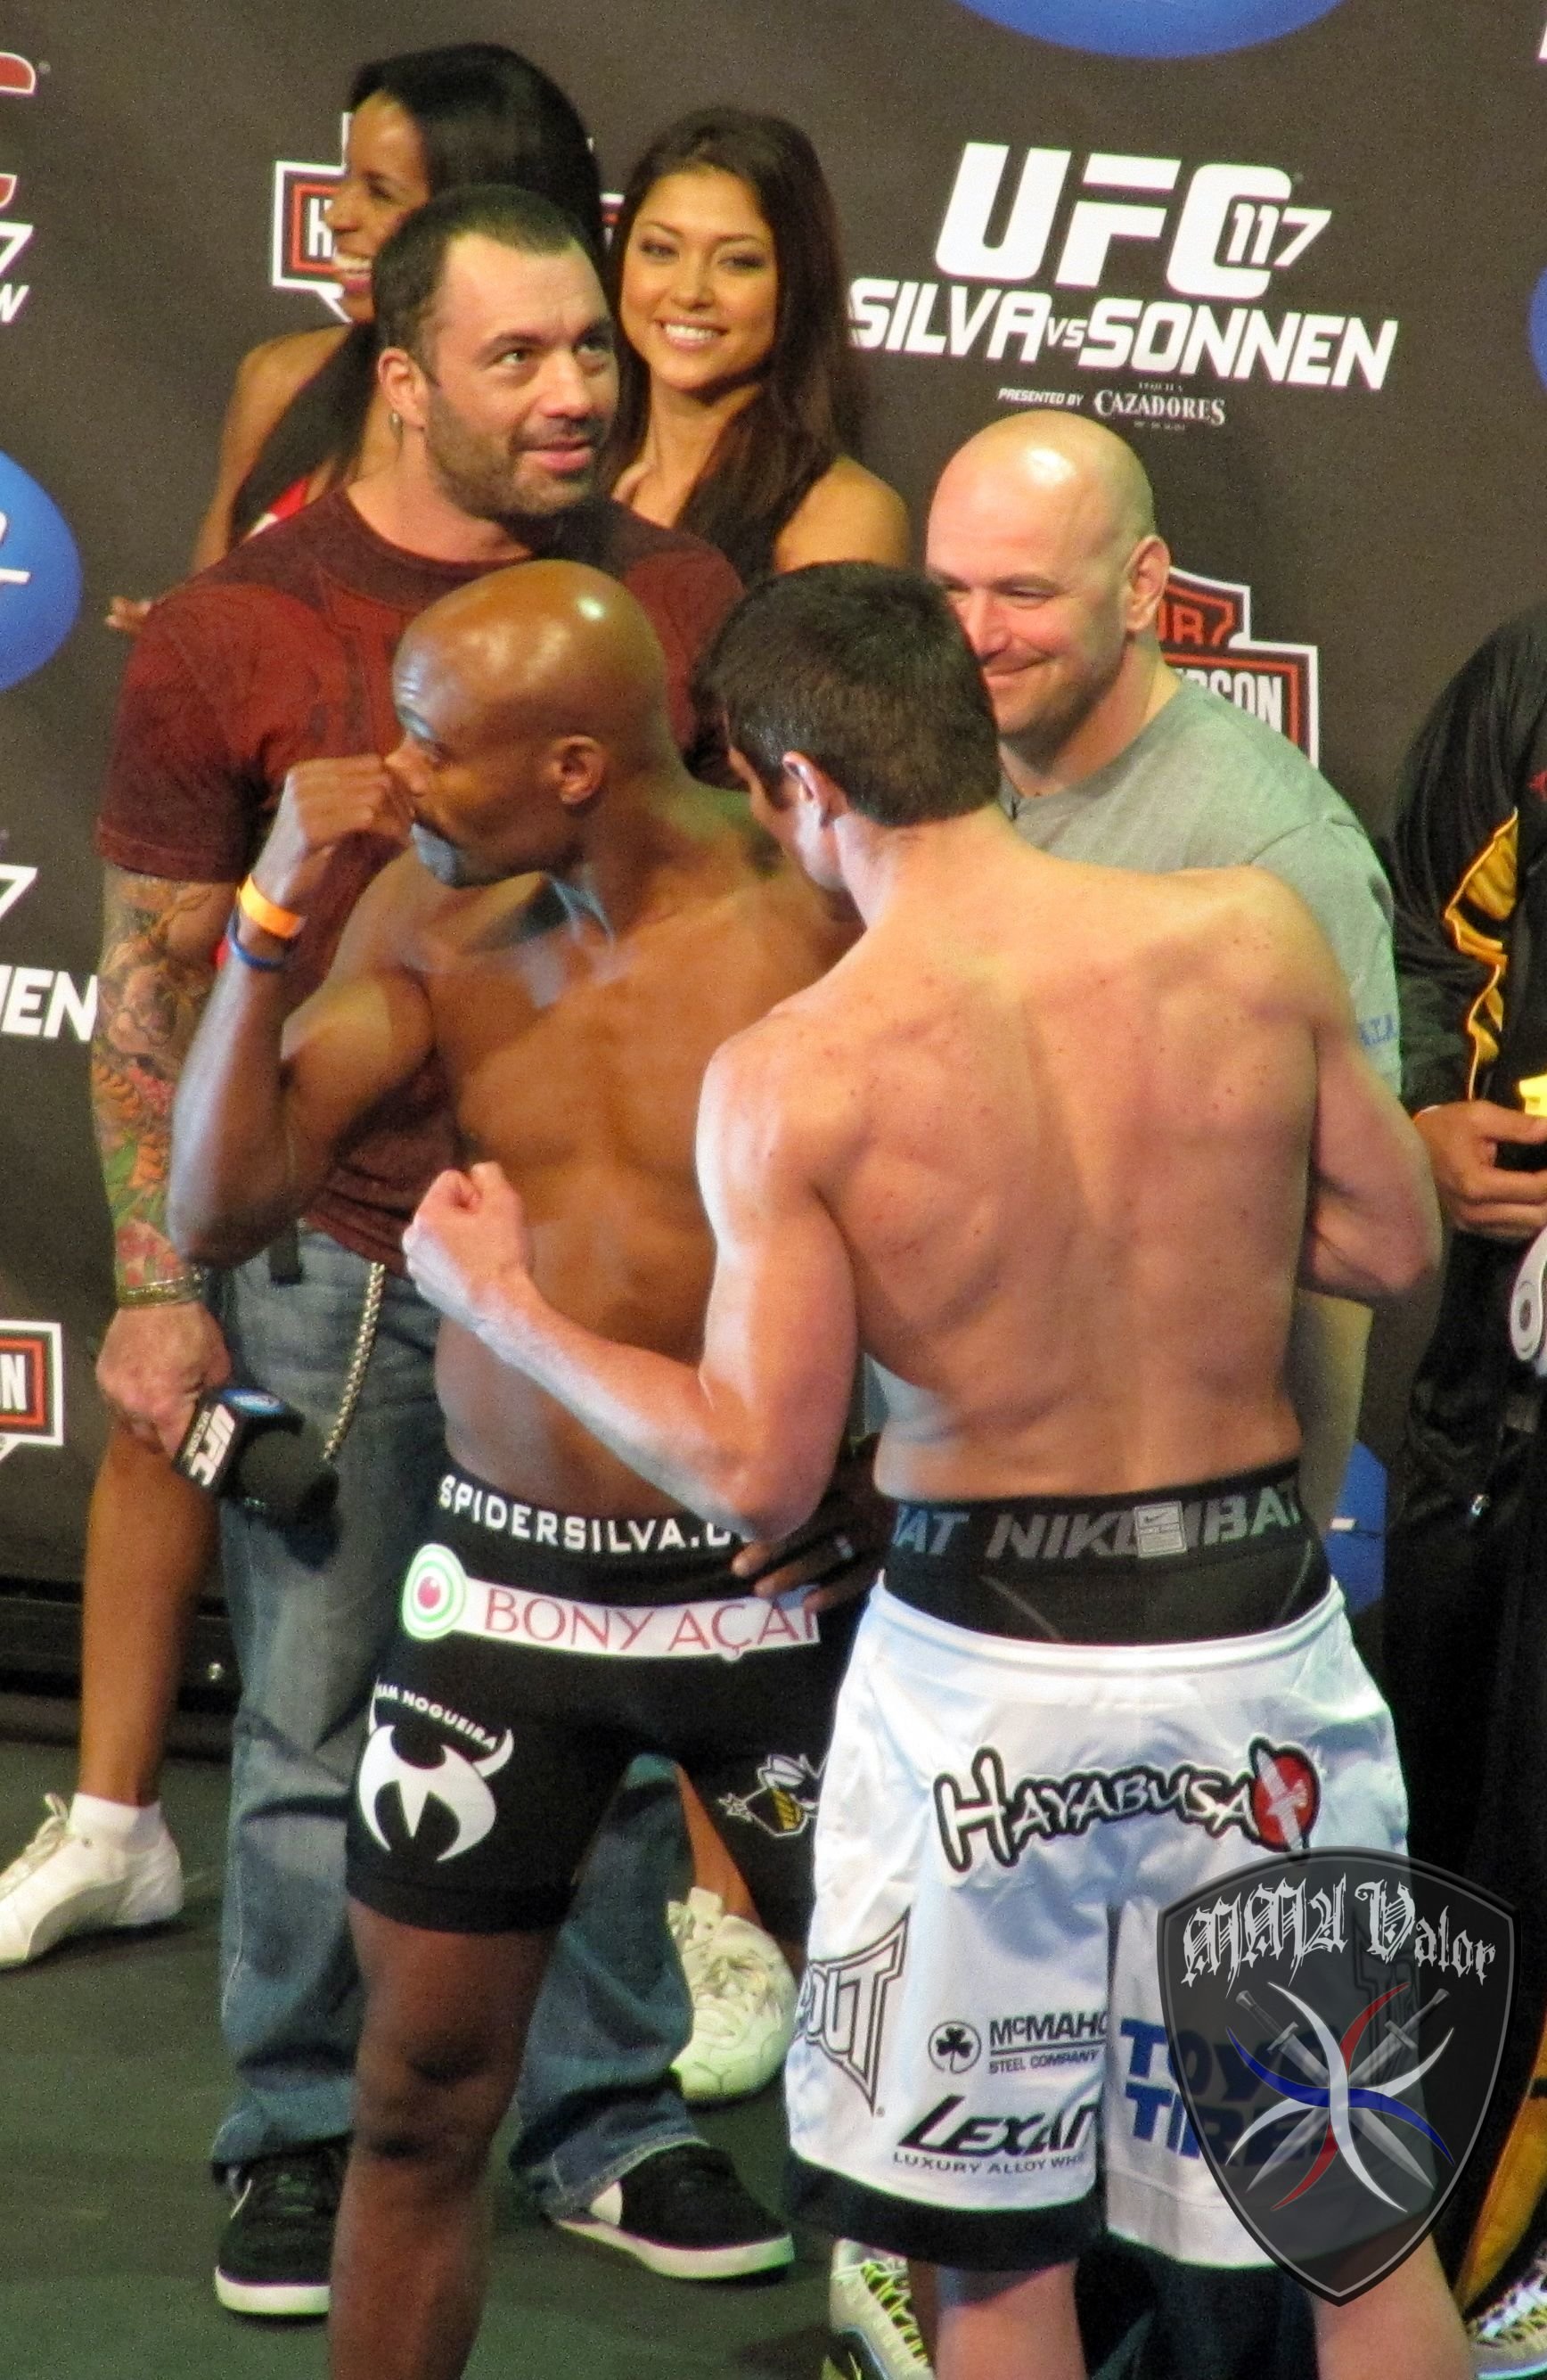 IMG 1942 edited Anderson Silva Makes it look easy again, Now what?